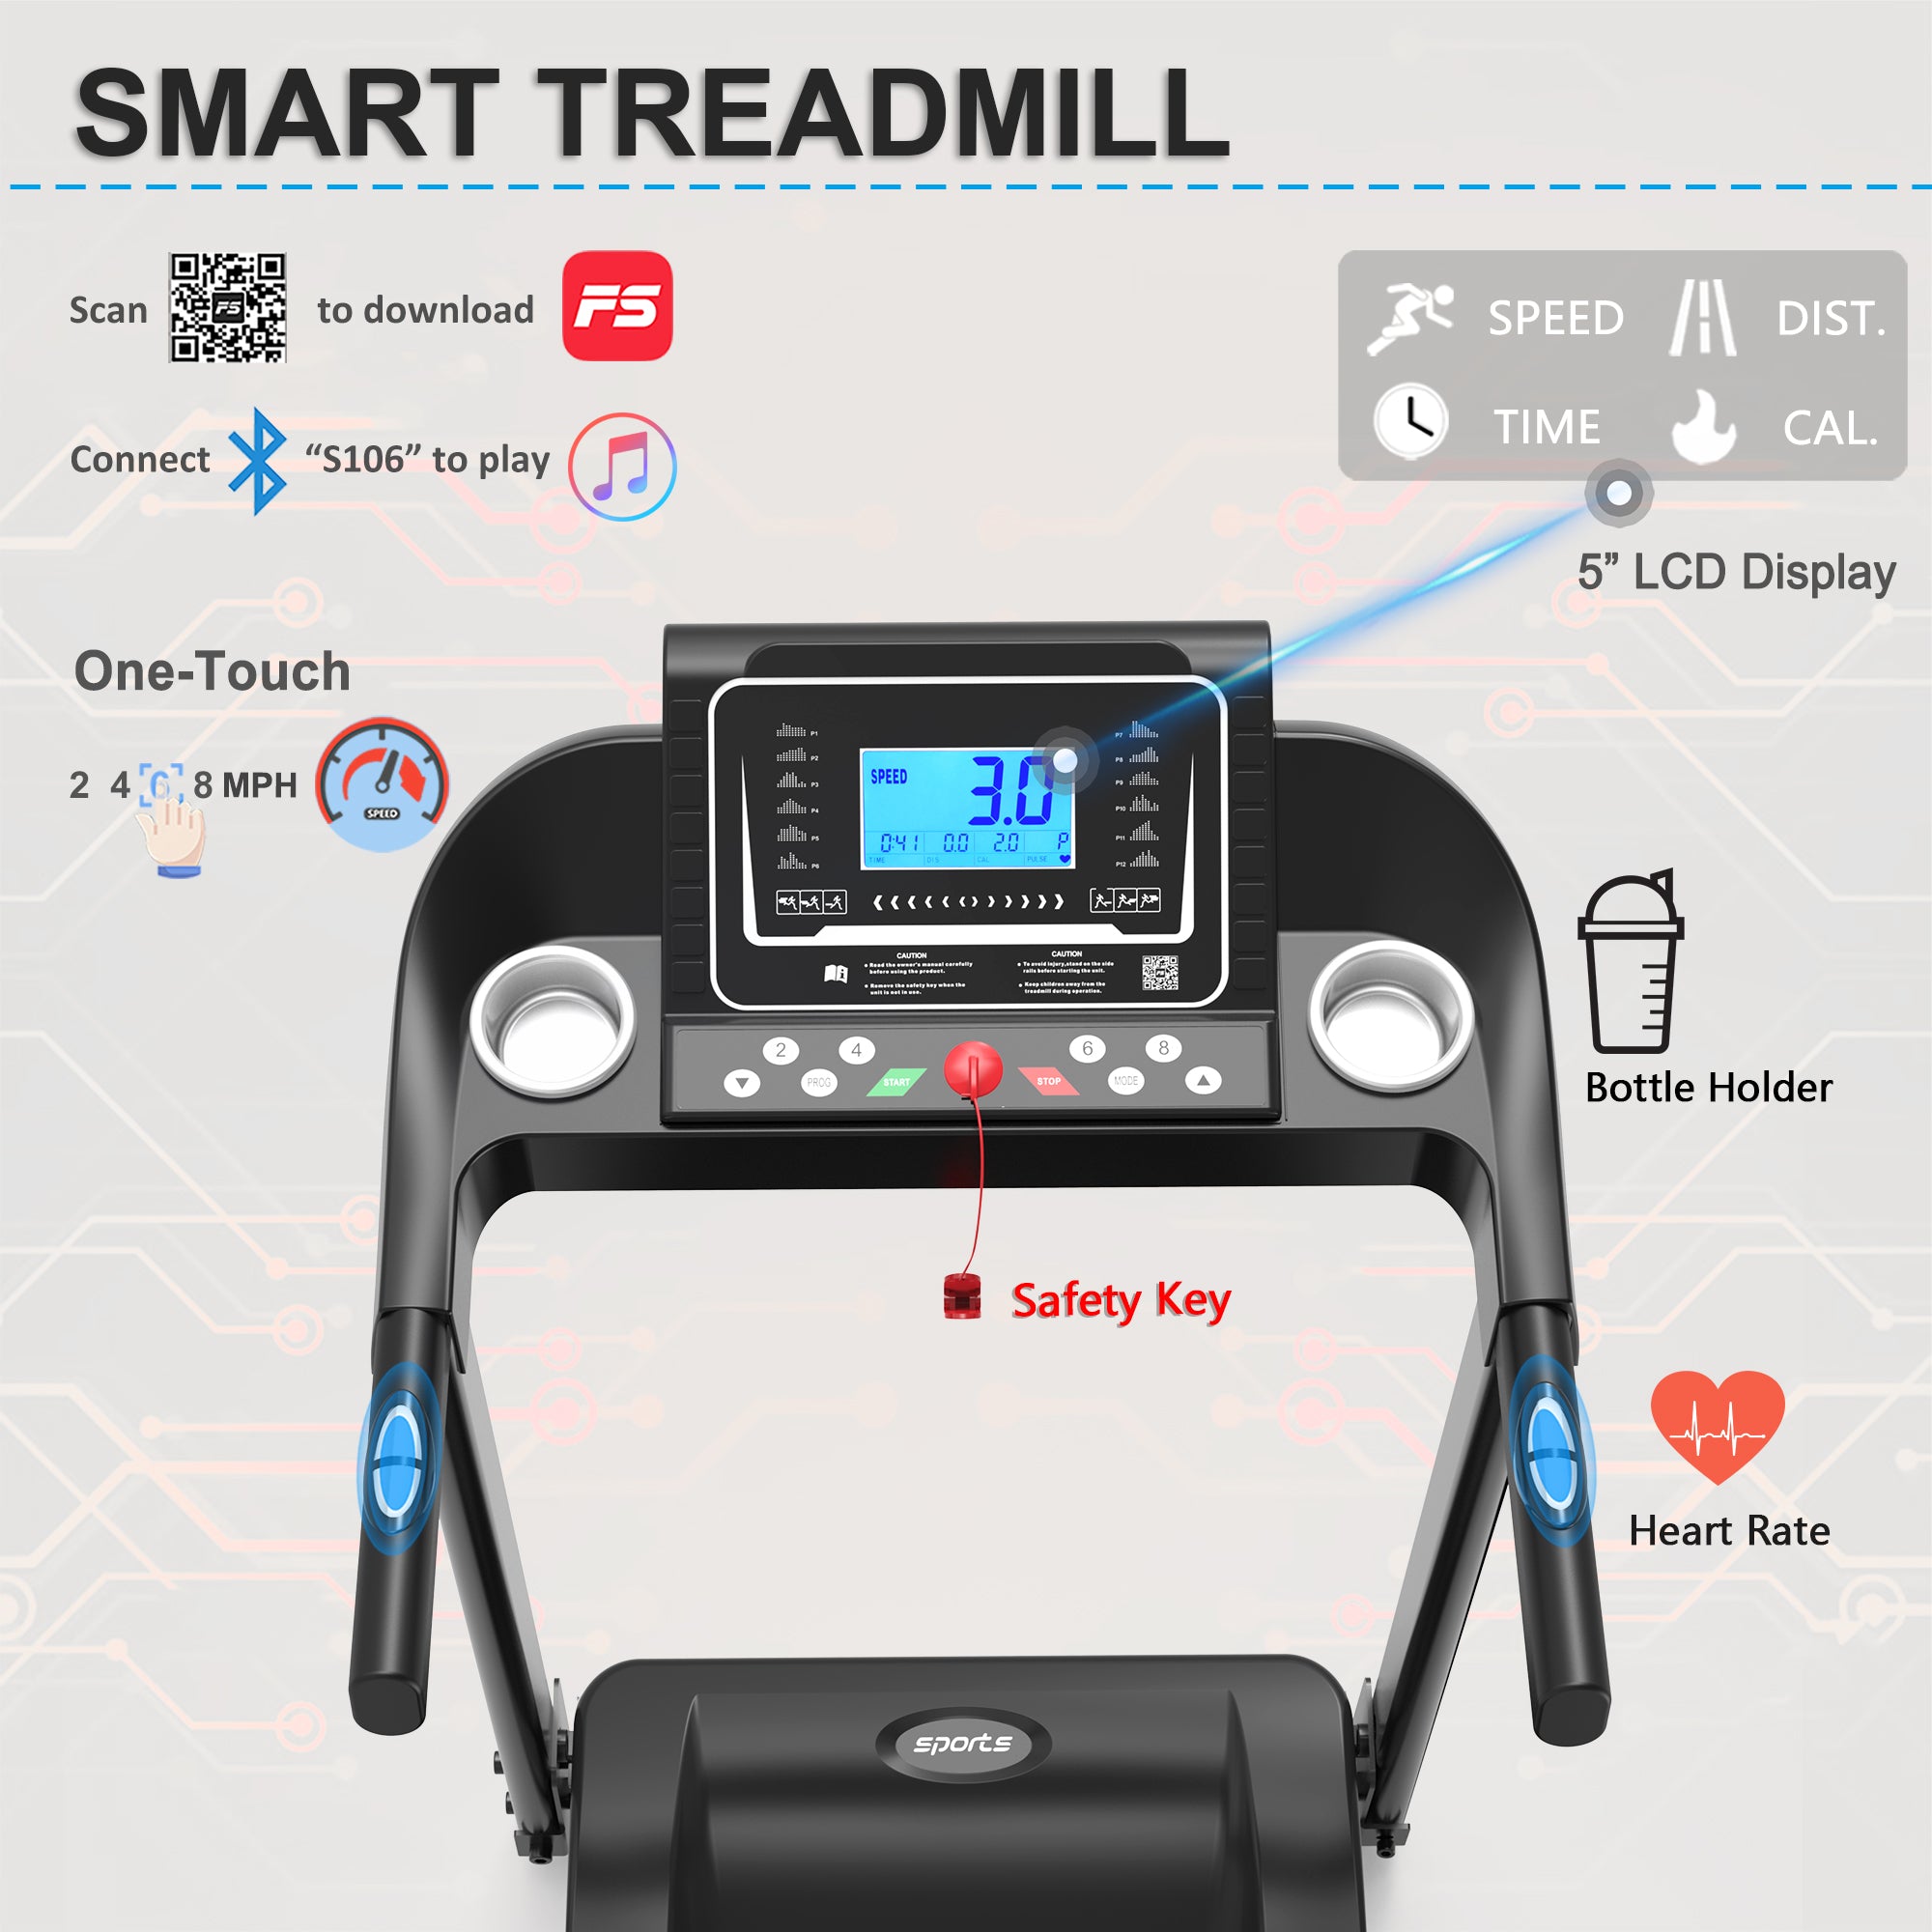 Fitshow App Home Foldable Treadmill with Incline